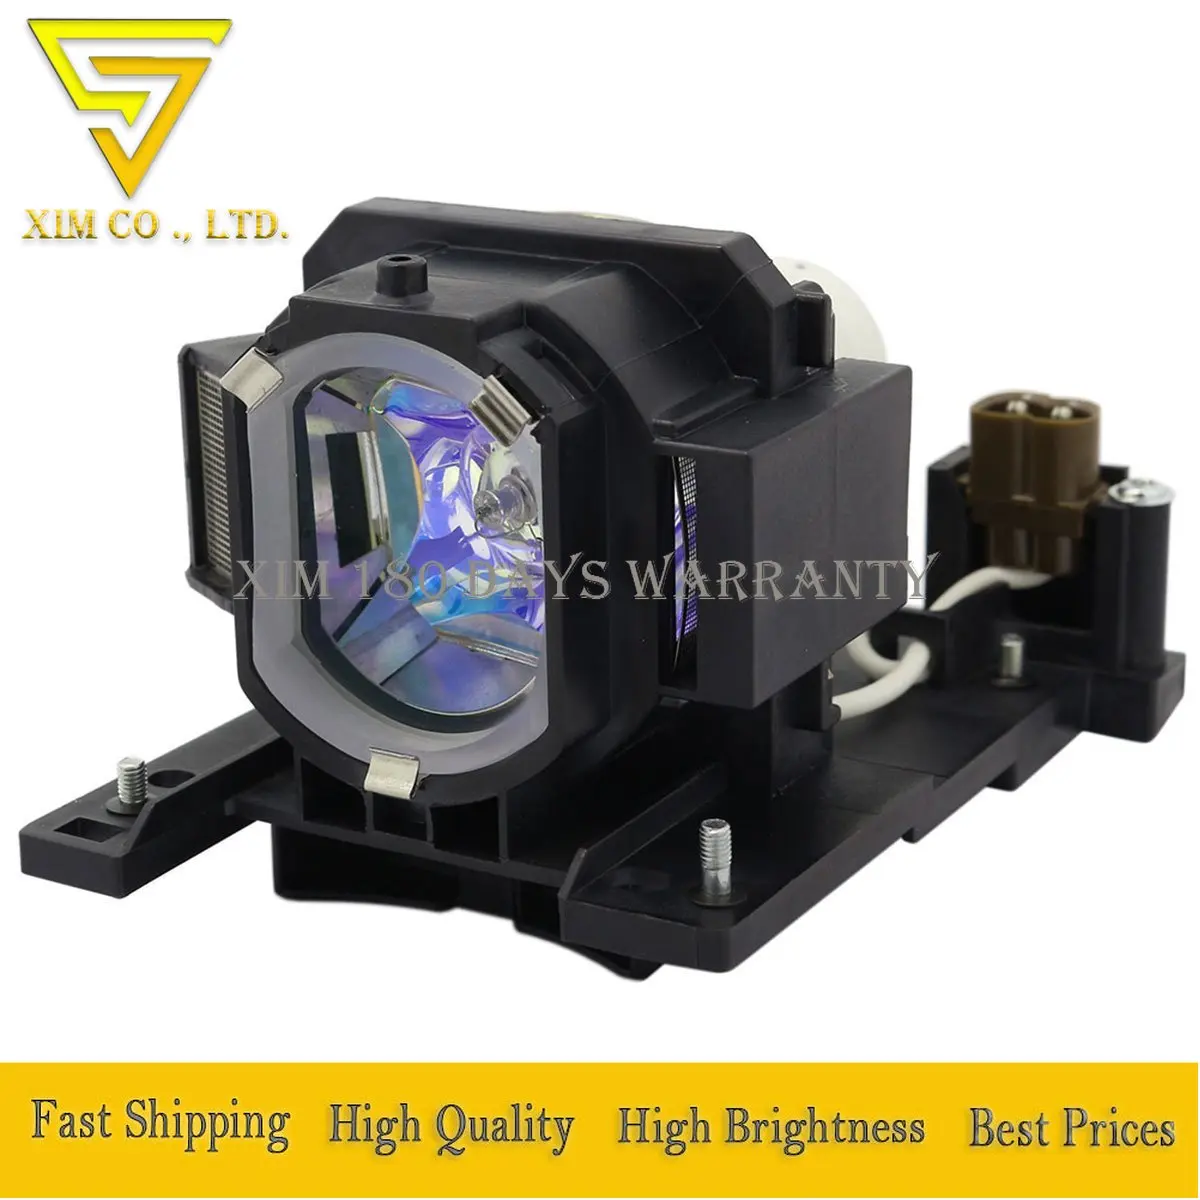 high quality DT01022 DT01026 Replacement Lamp with Housing for Hitachi CP-RX80W CP-RX78 ED-X24 CP-RX78W CP-RX80 projectors